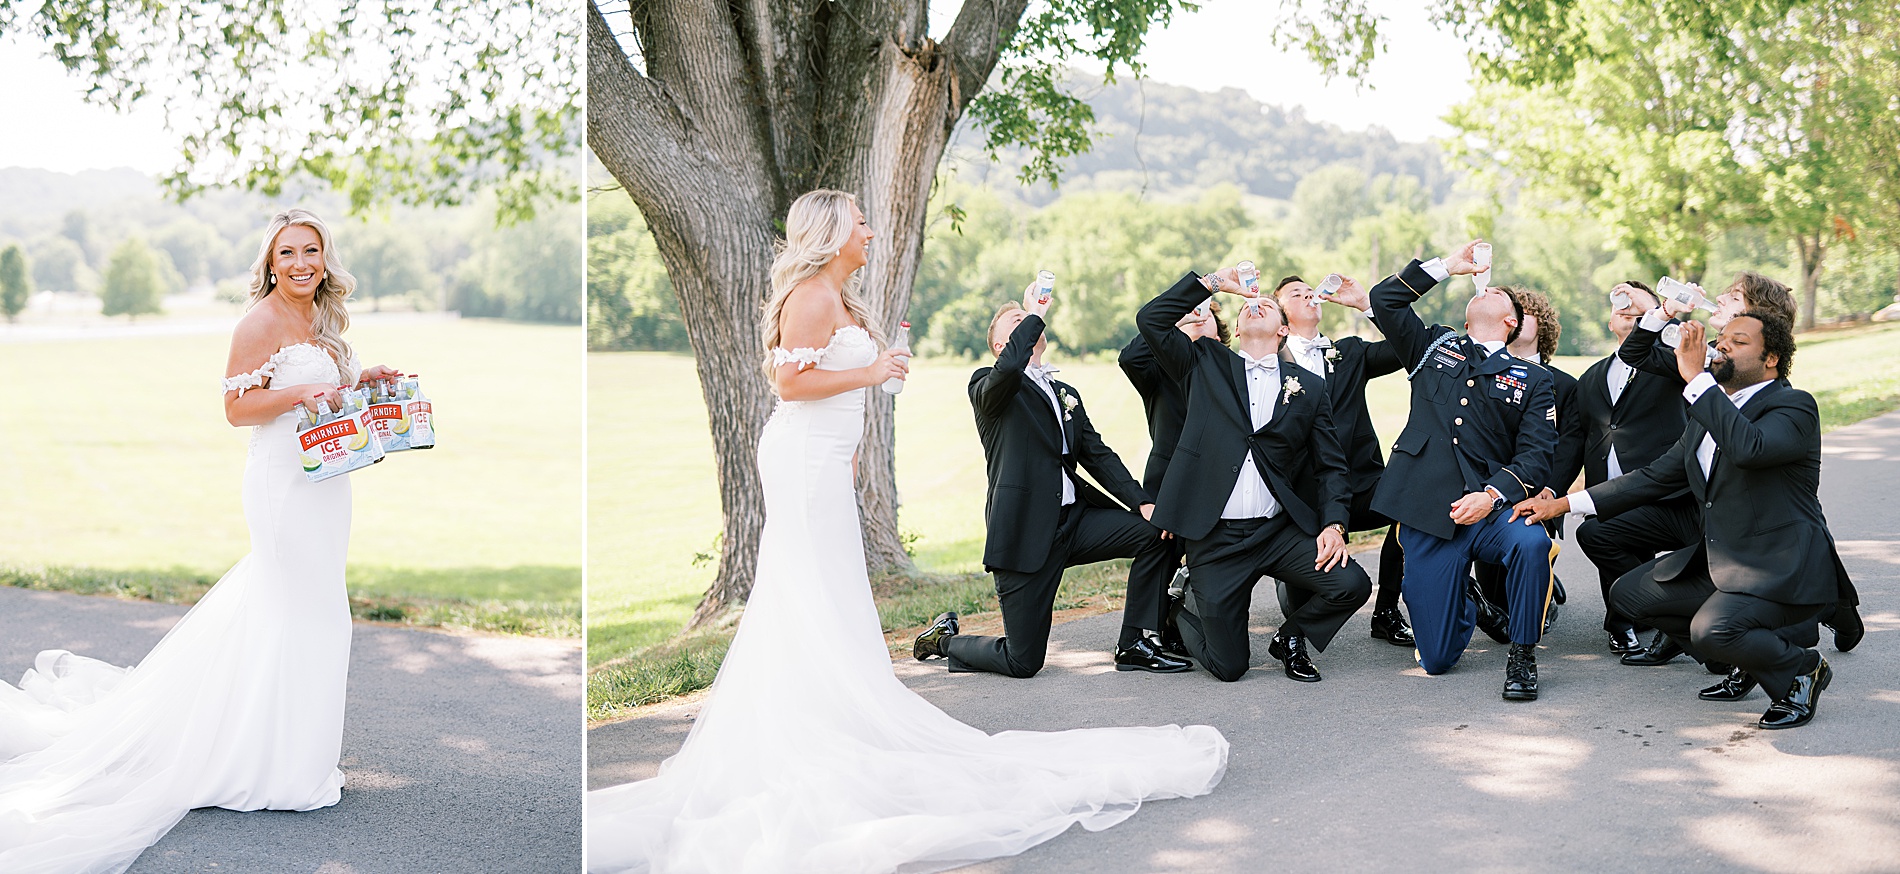 bride giving groomsmen a drink during fun wedding party portraits 